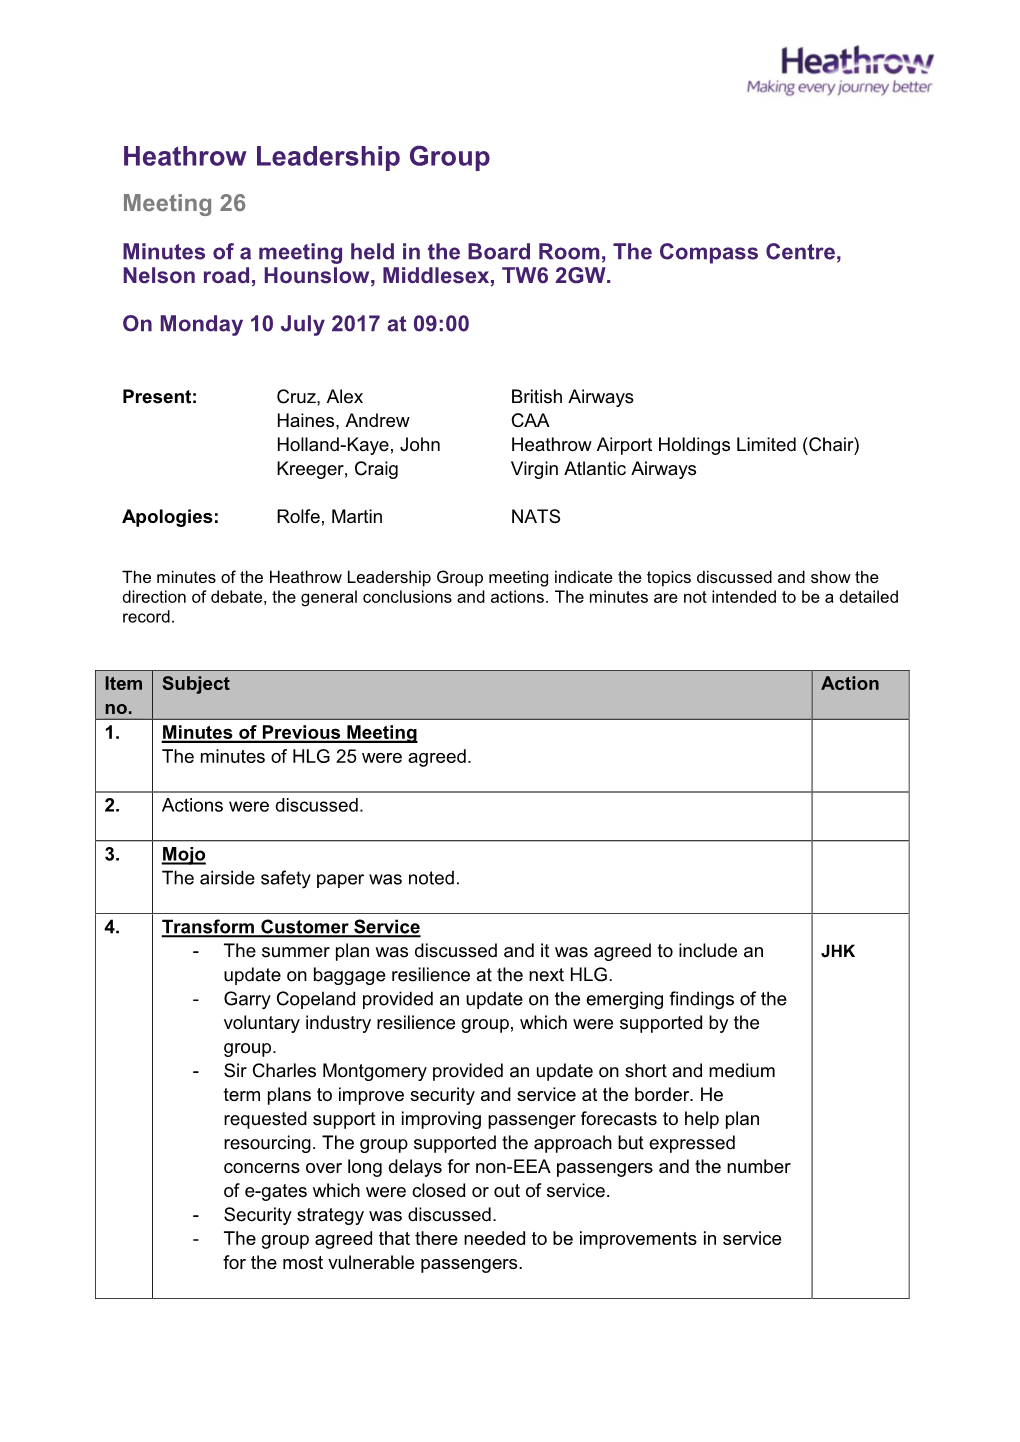 Minutes of a Meeting Held in the Board Room, the Compass Centre, Nelson Road, Hounslow, Middlesex, TW6 2GW